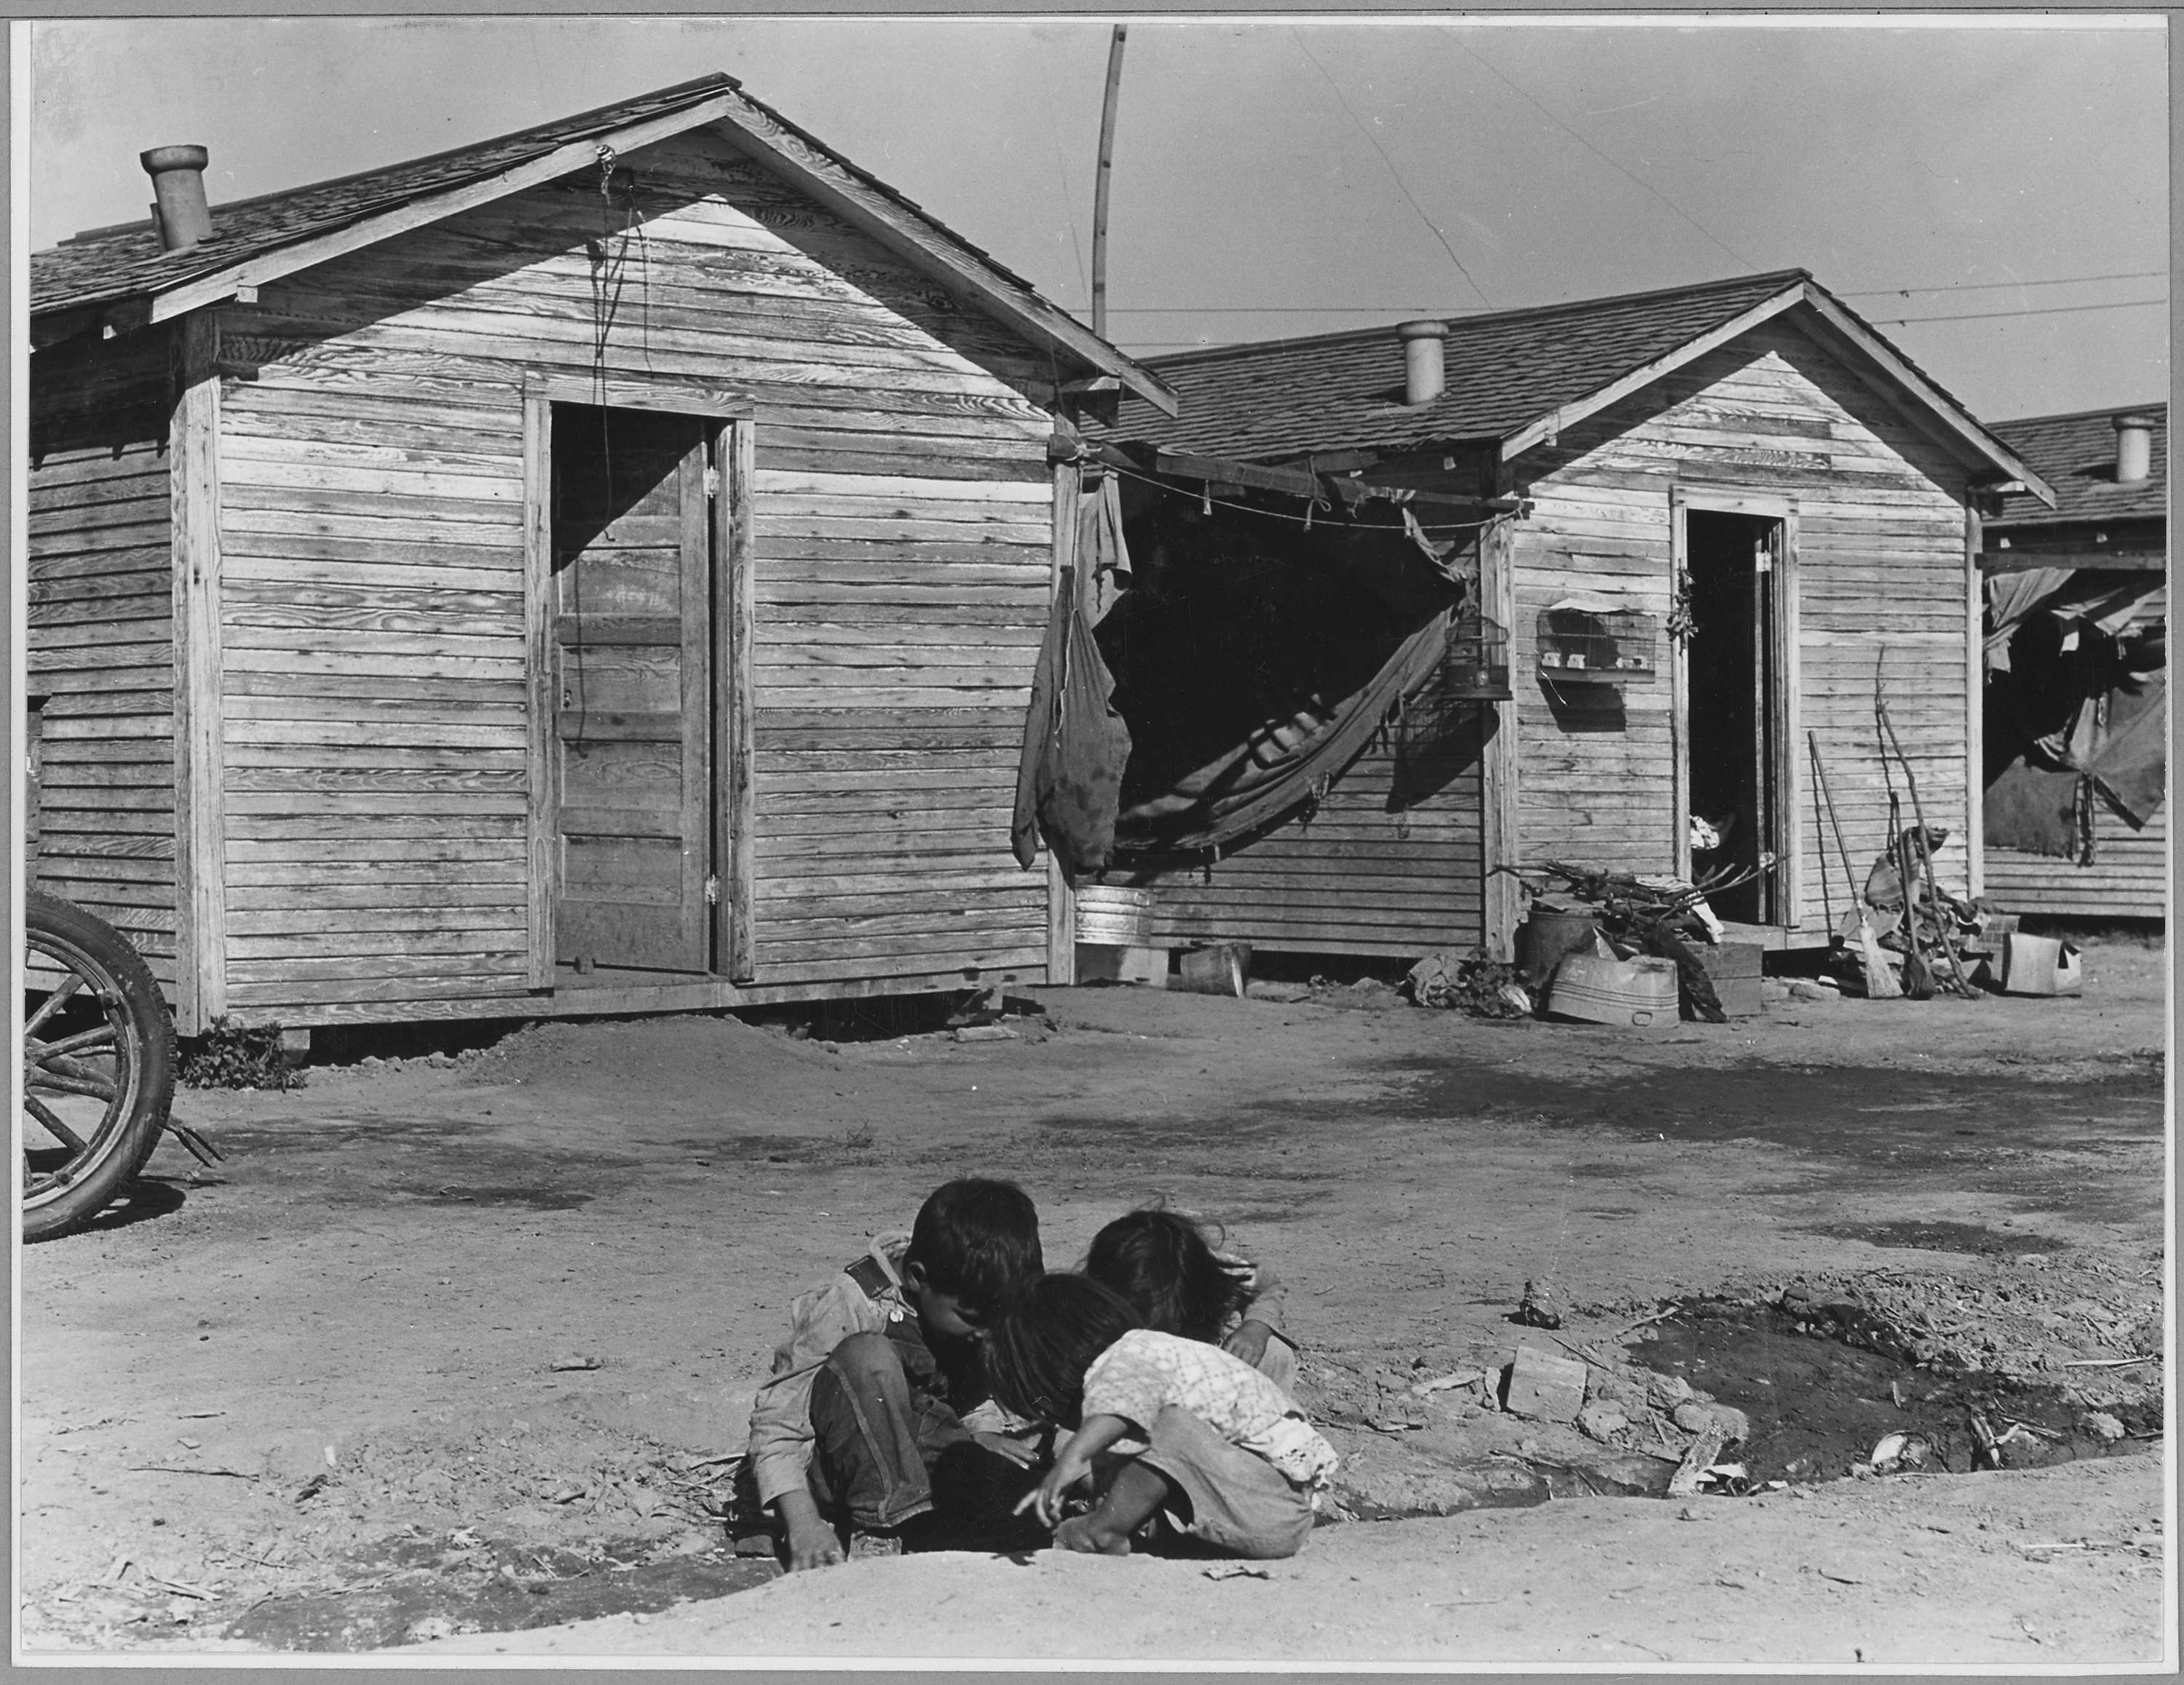 Corcoran, San Joaquin Valley California. Company housing for Mexican cotton pickers on large ranch.